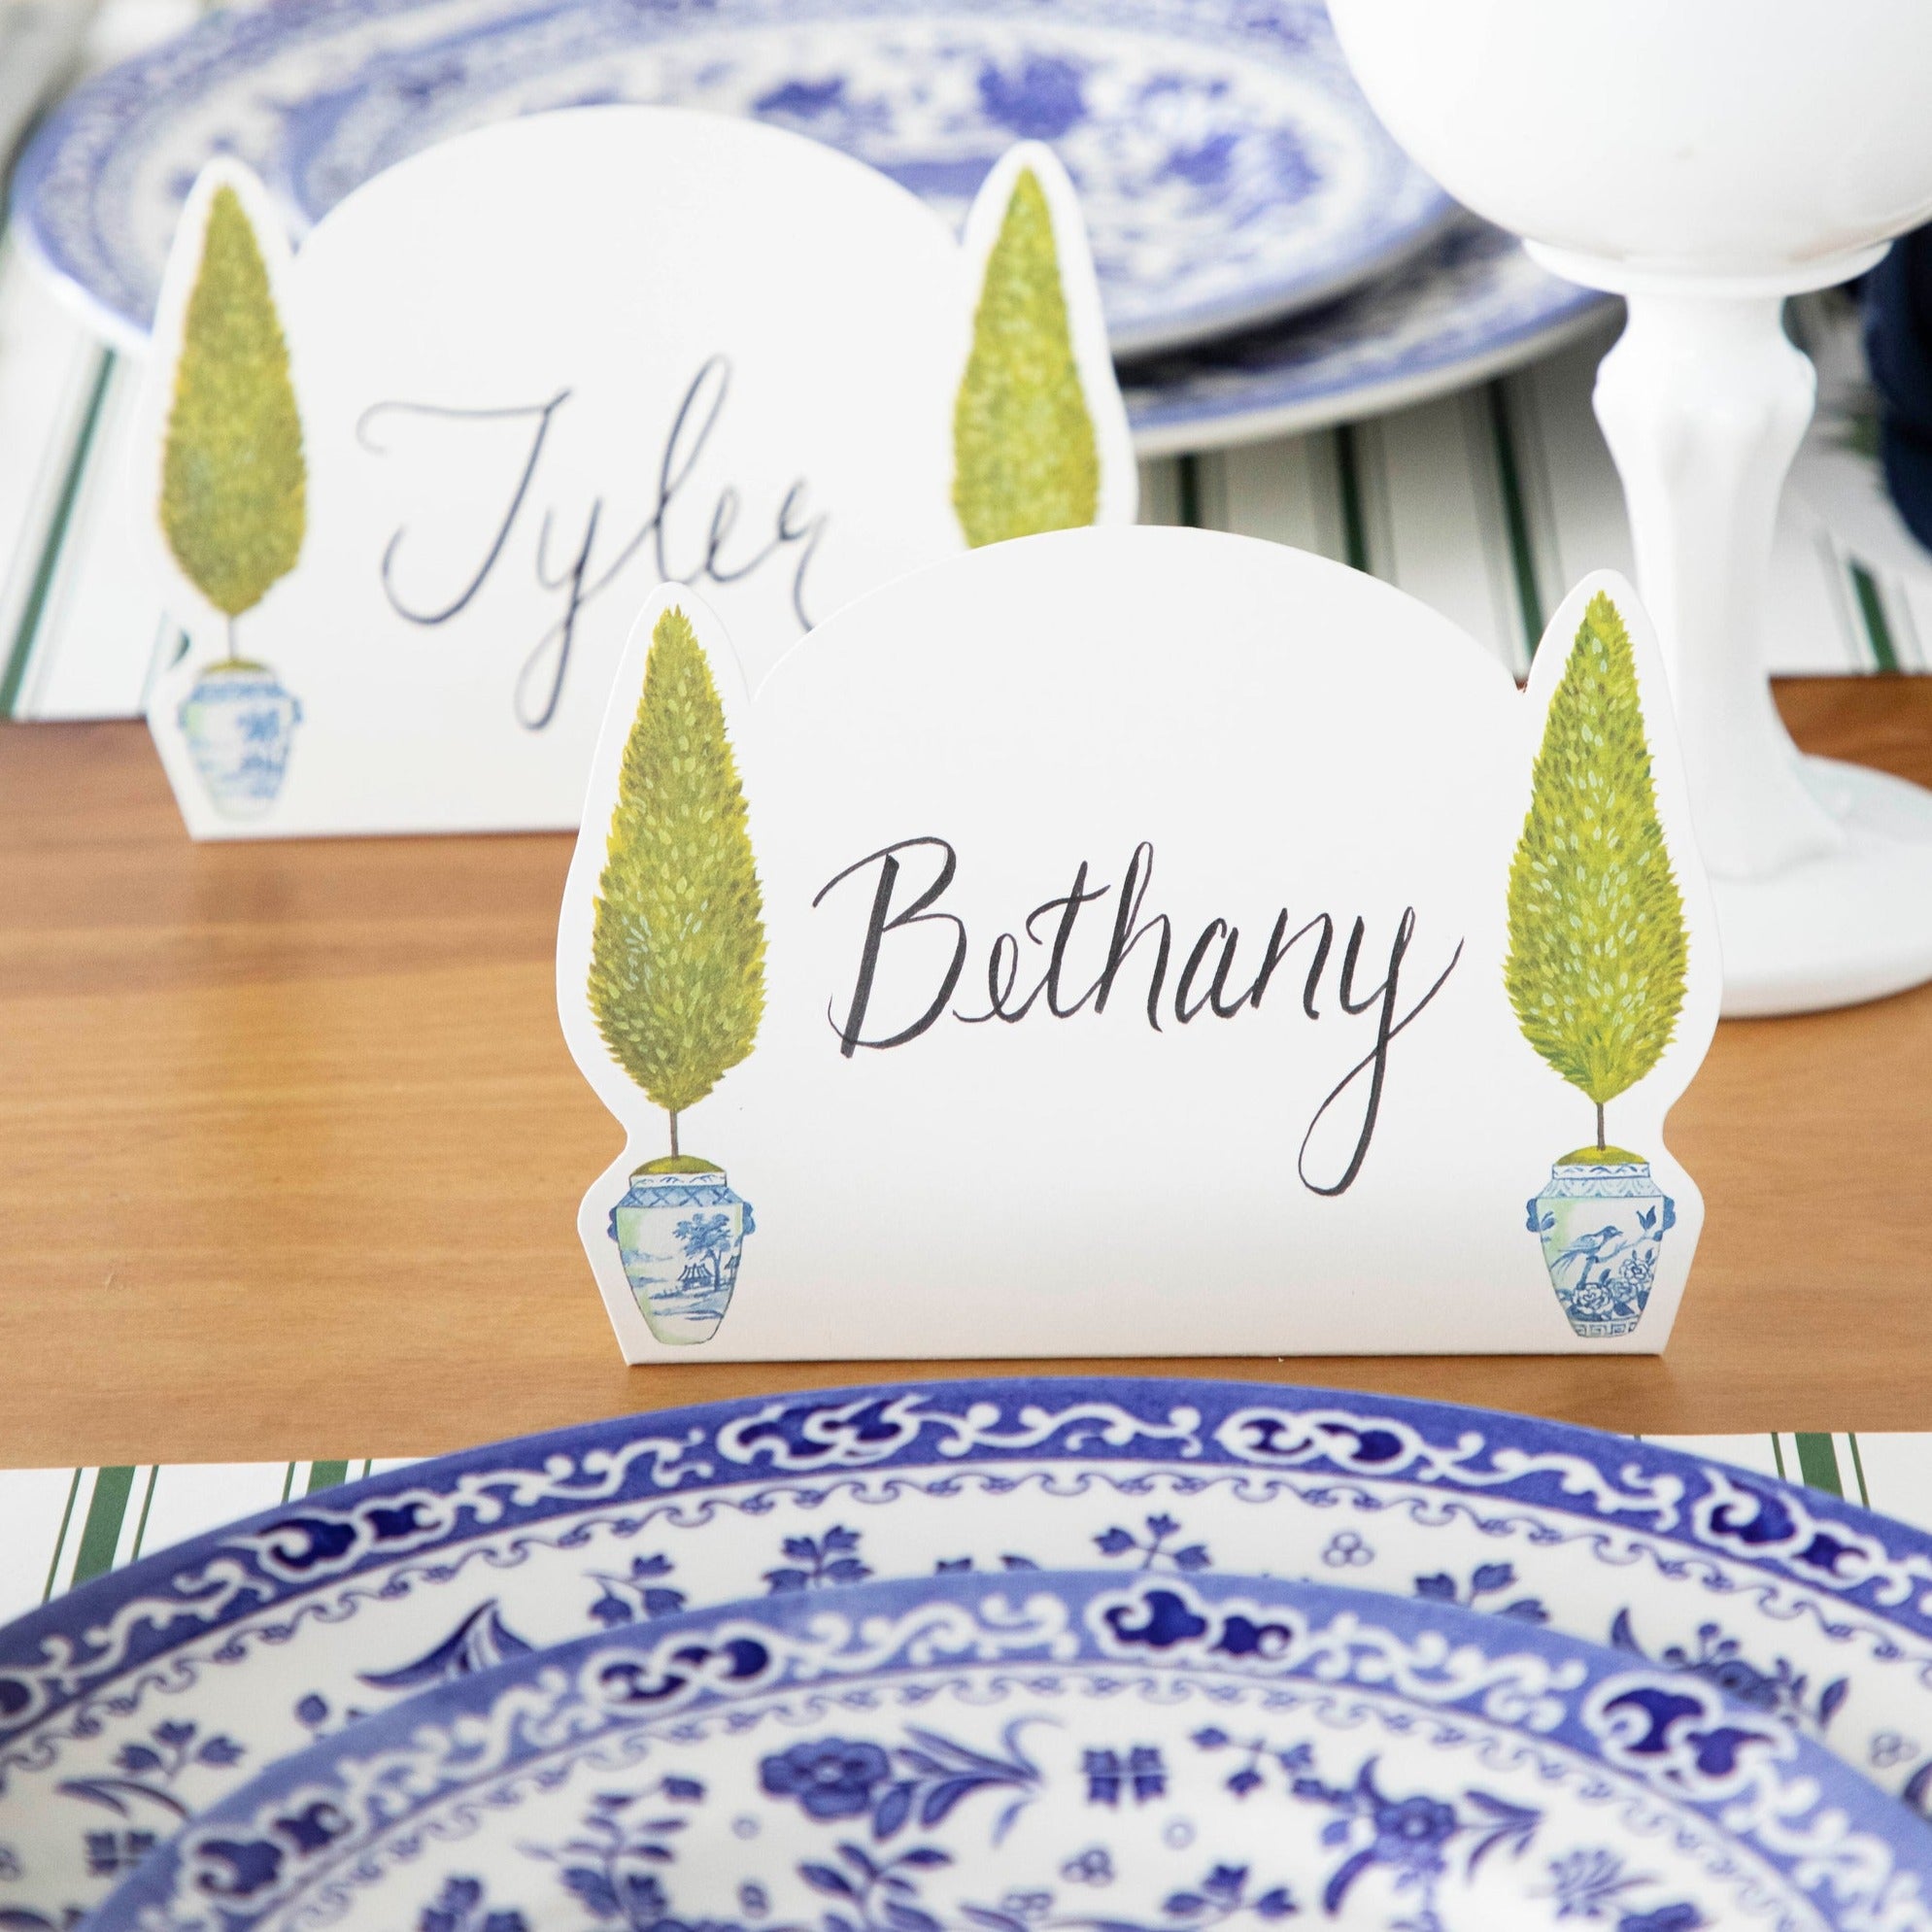 Two Topiary Place Cards labeled &quot;Tyler&quot; and &quot;Bethany&quot; standing on an elegant table setting.